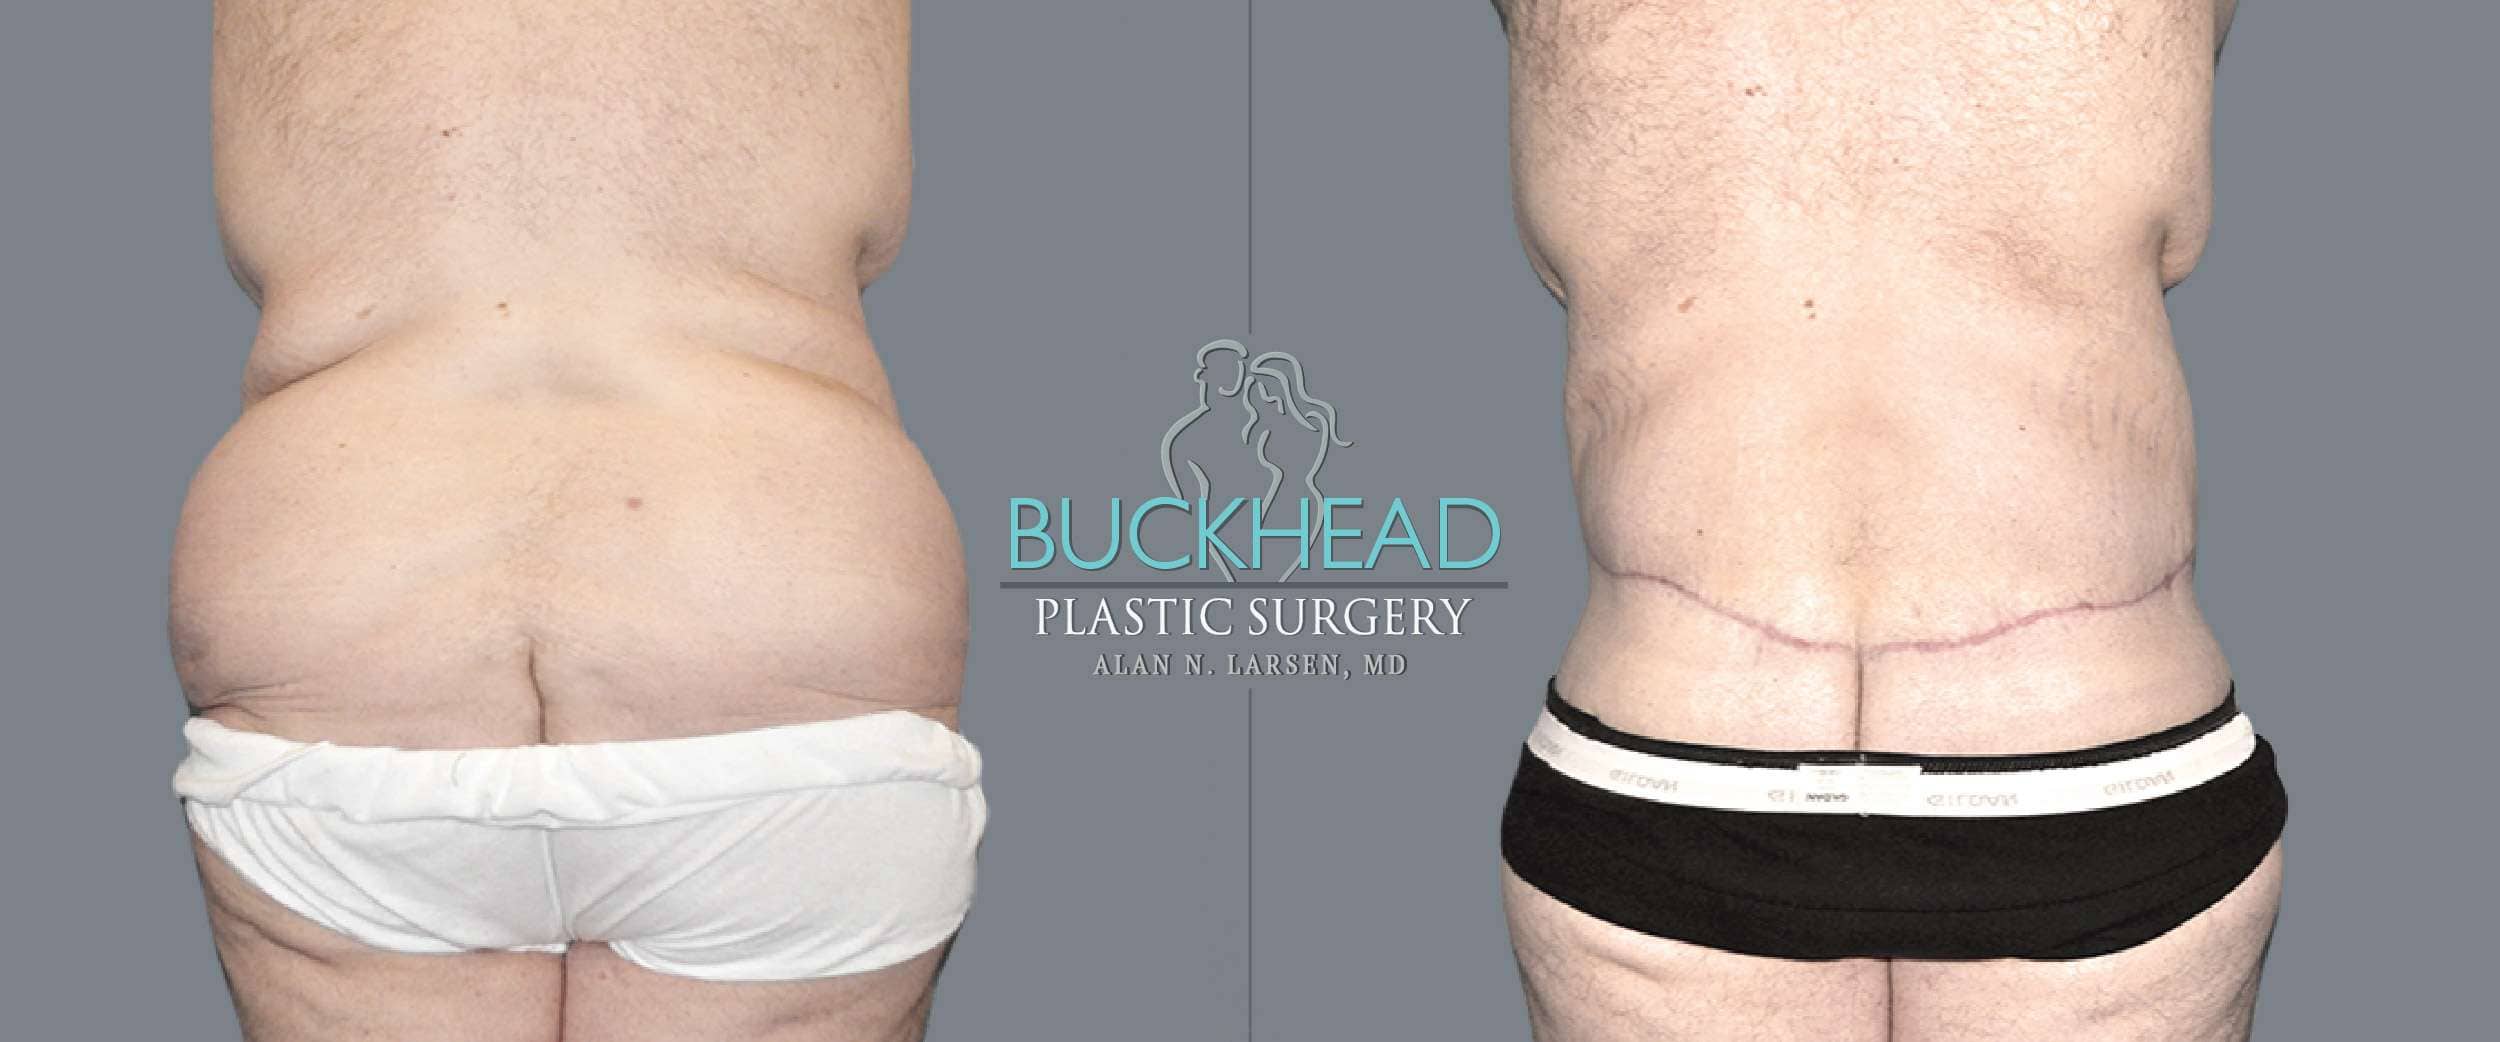 Before and After Photo gallery | Body Lift | Buckhead Plastic Surgery | Board-Certified Plastic Surgeon in Atlanta GA